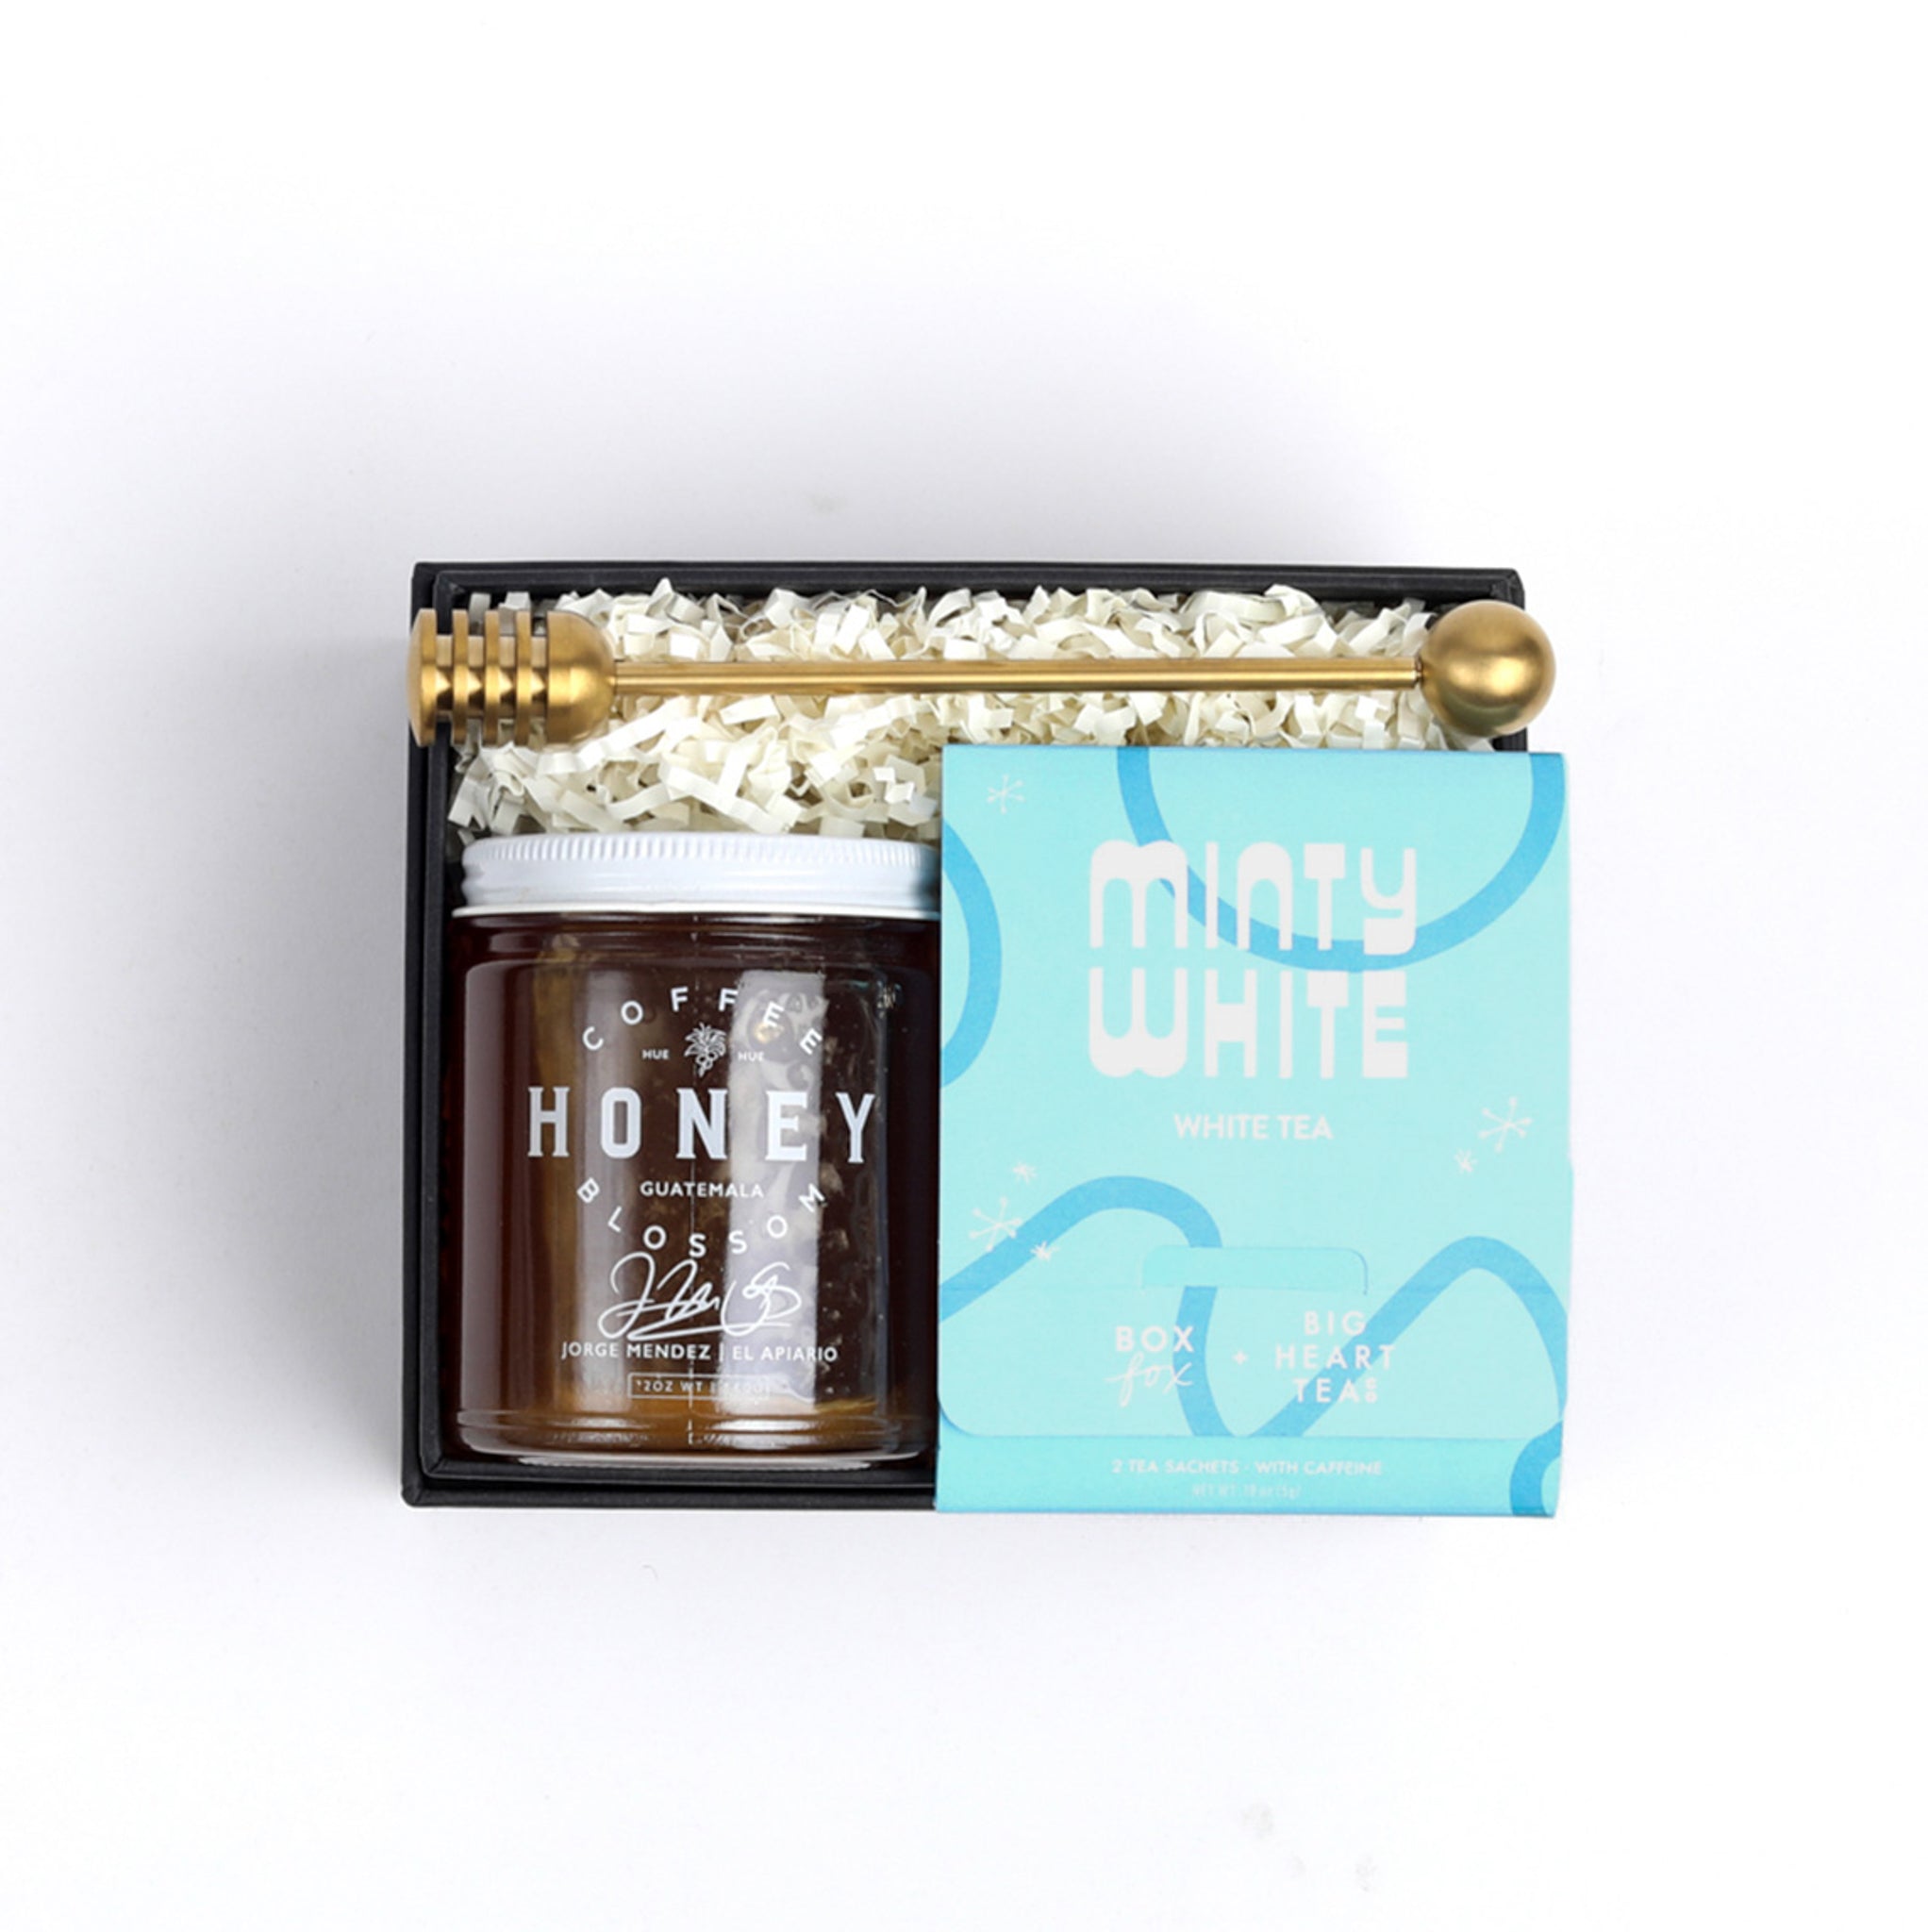 BOXFOX Black gift box packed with gold honey dipper, jar of honey and blue minty why tea sachet